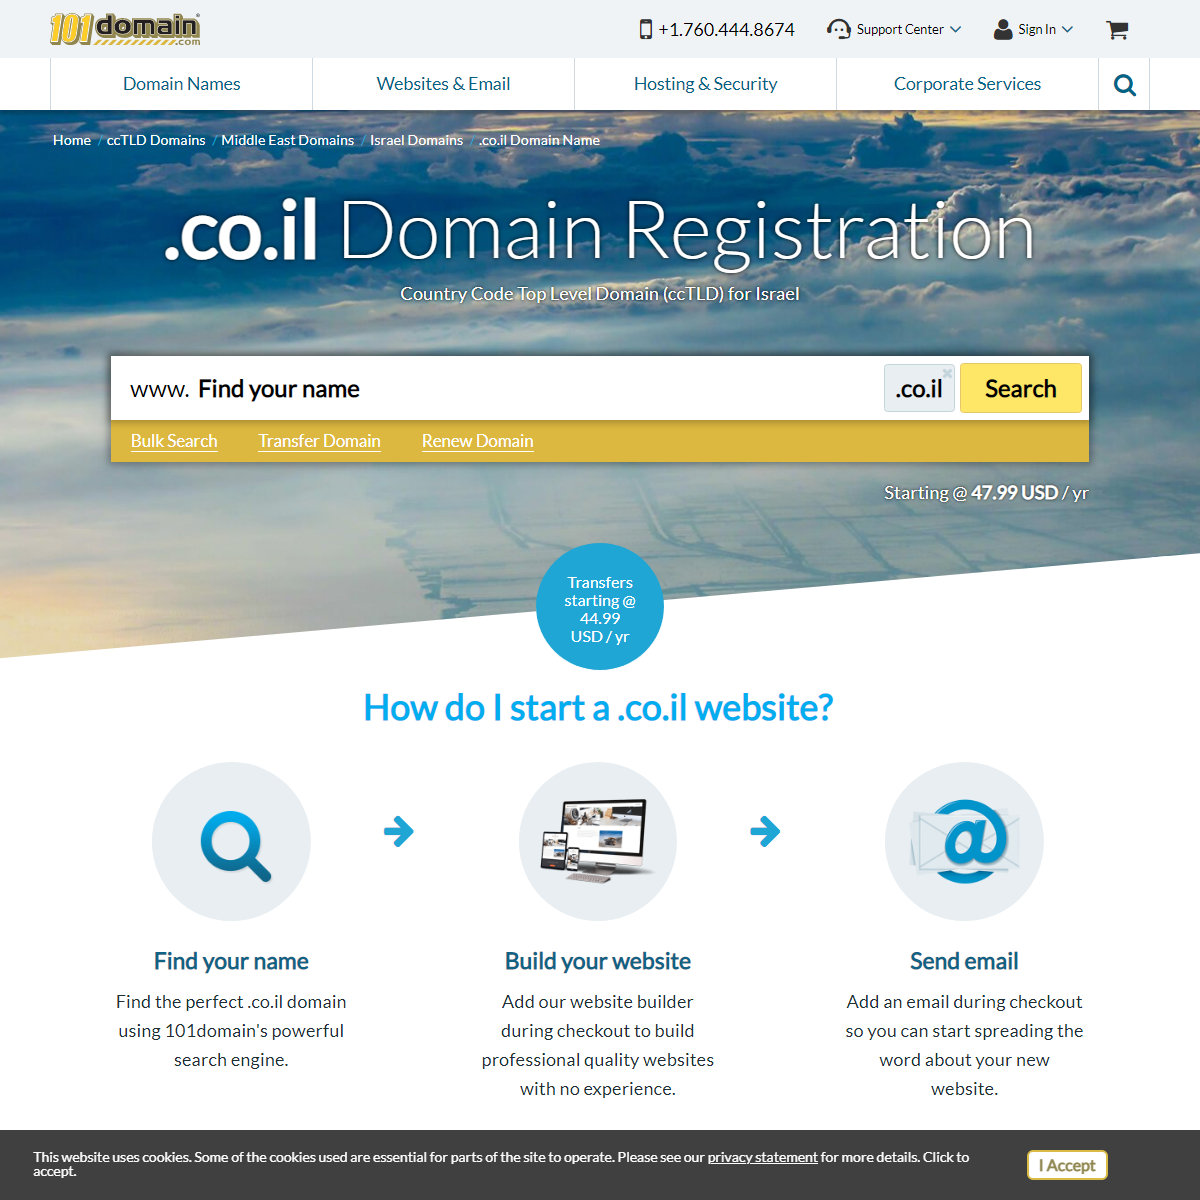 A complete backup of https://www.101domain.com/co_il.htm